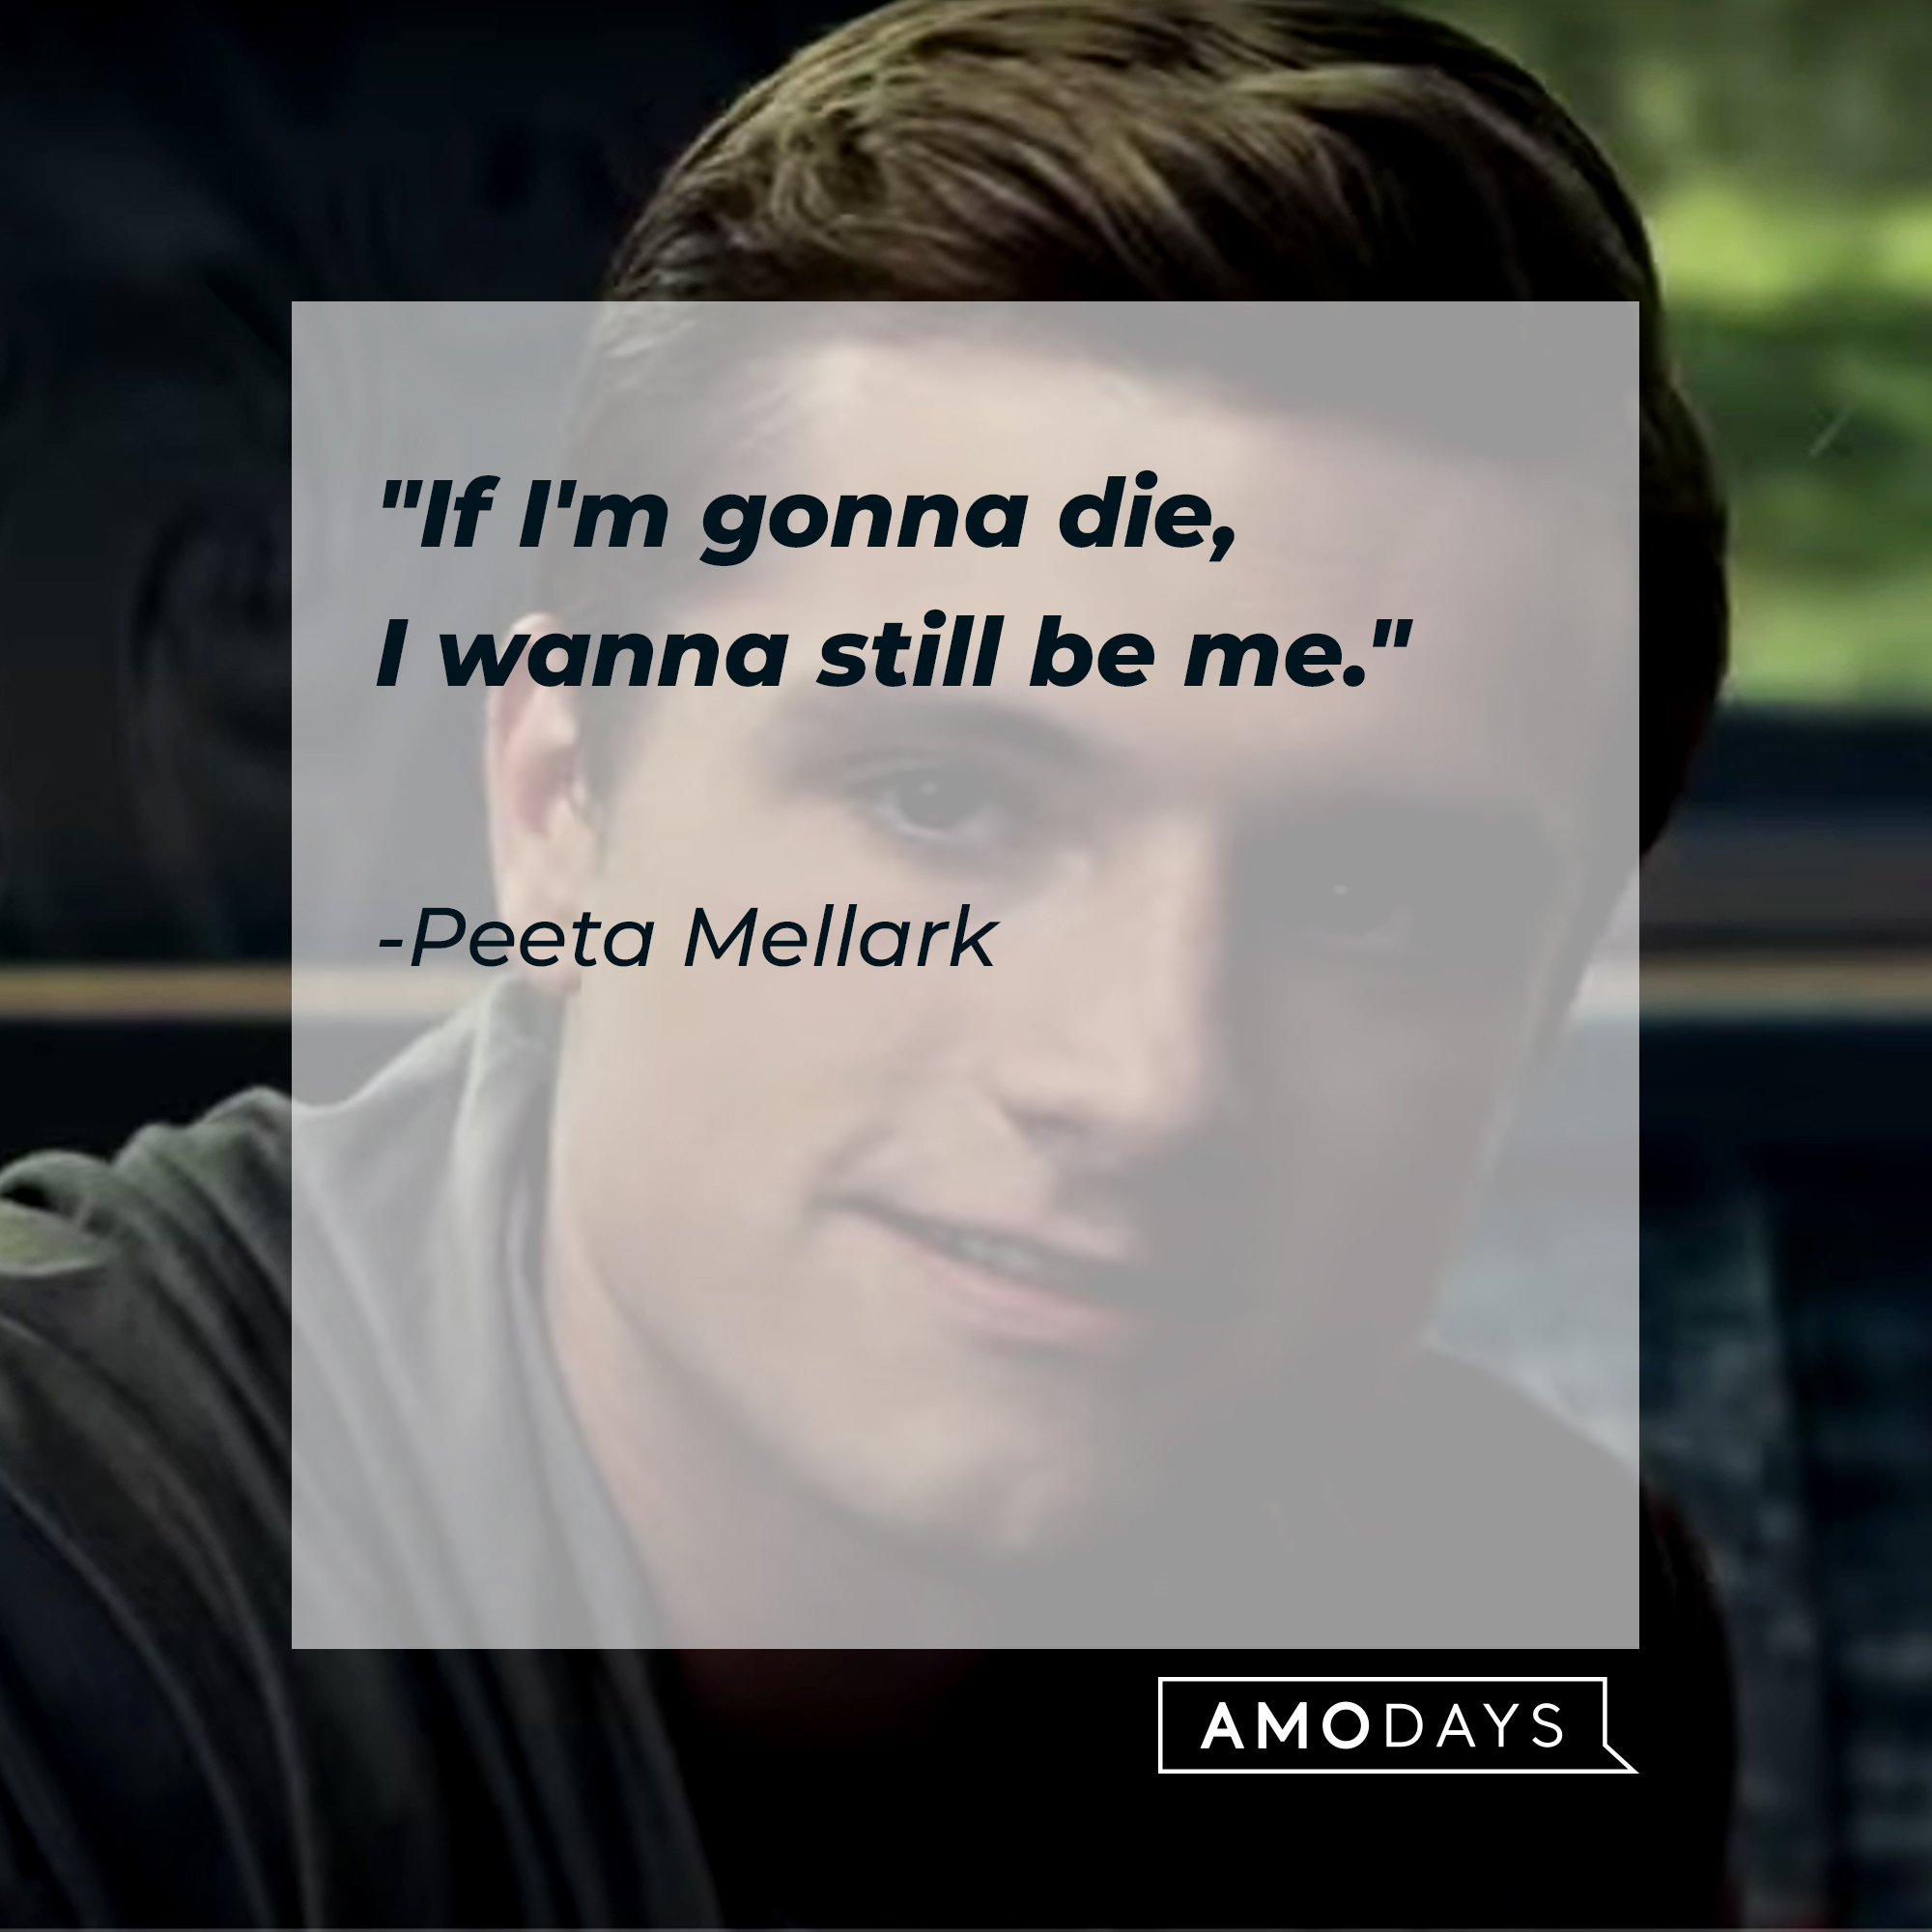 Peeta Mellark, with his quote: "If I'm gonna die, I wanna still be me." | Source: Youtube.com/TheHungerGamesMovies